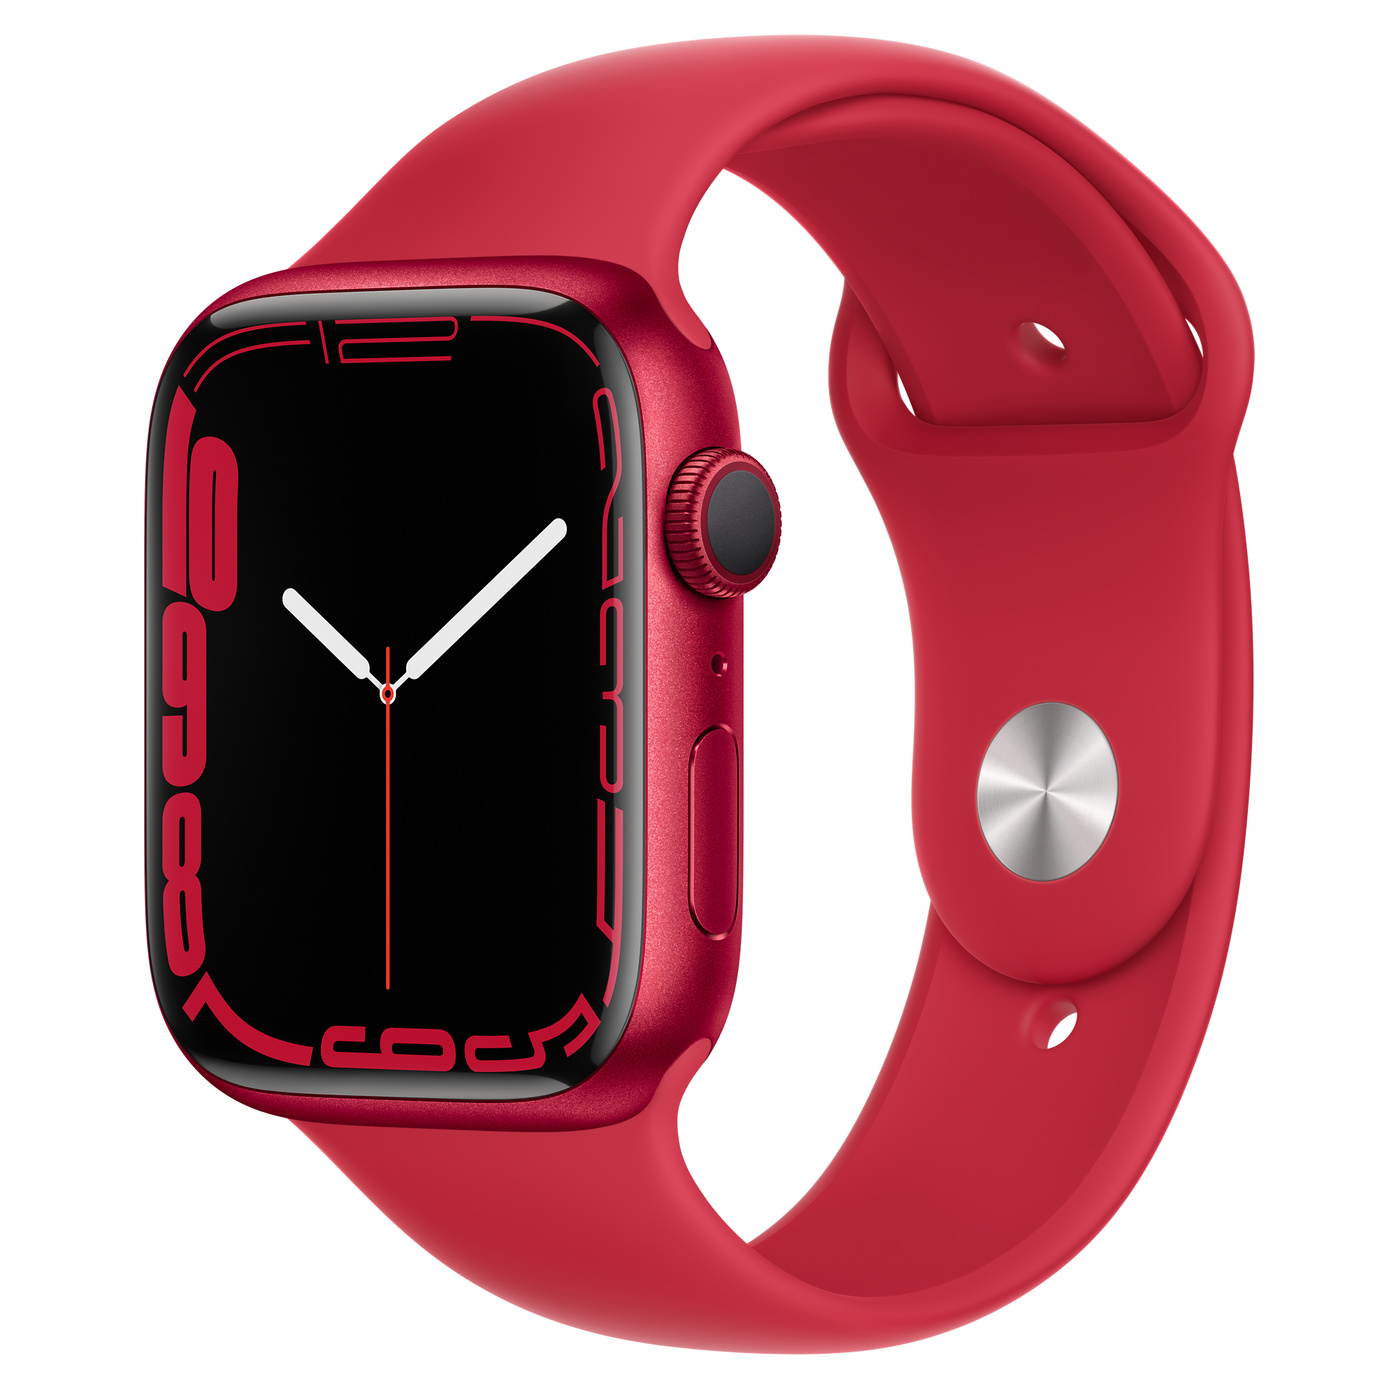 Apple Watch Ser7 Alu GPS + Cell (PRODUCT)RED 41 mm (PRODUCT)RED Sport Band Regular